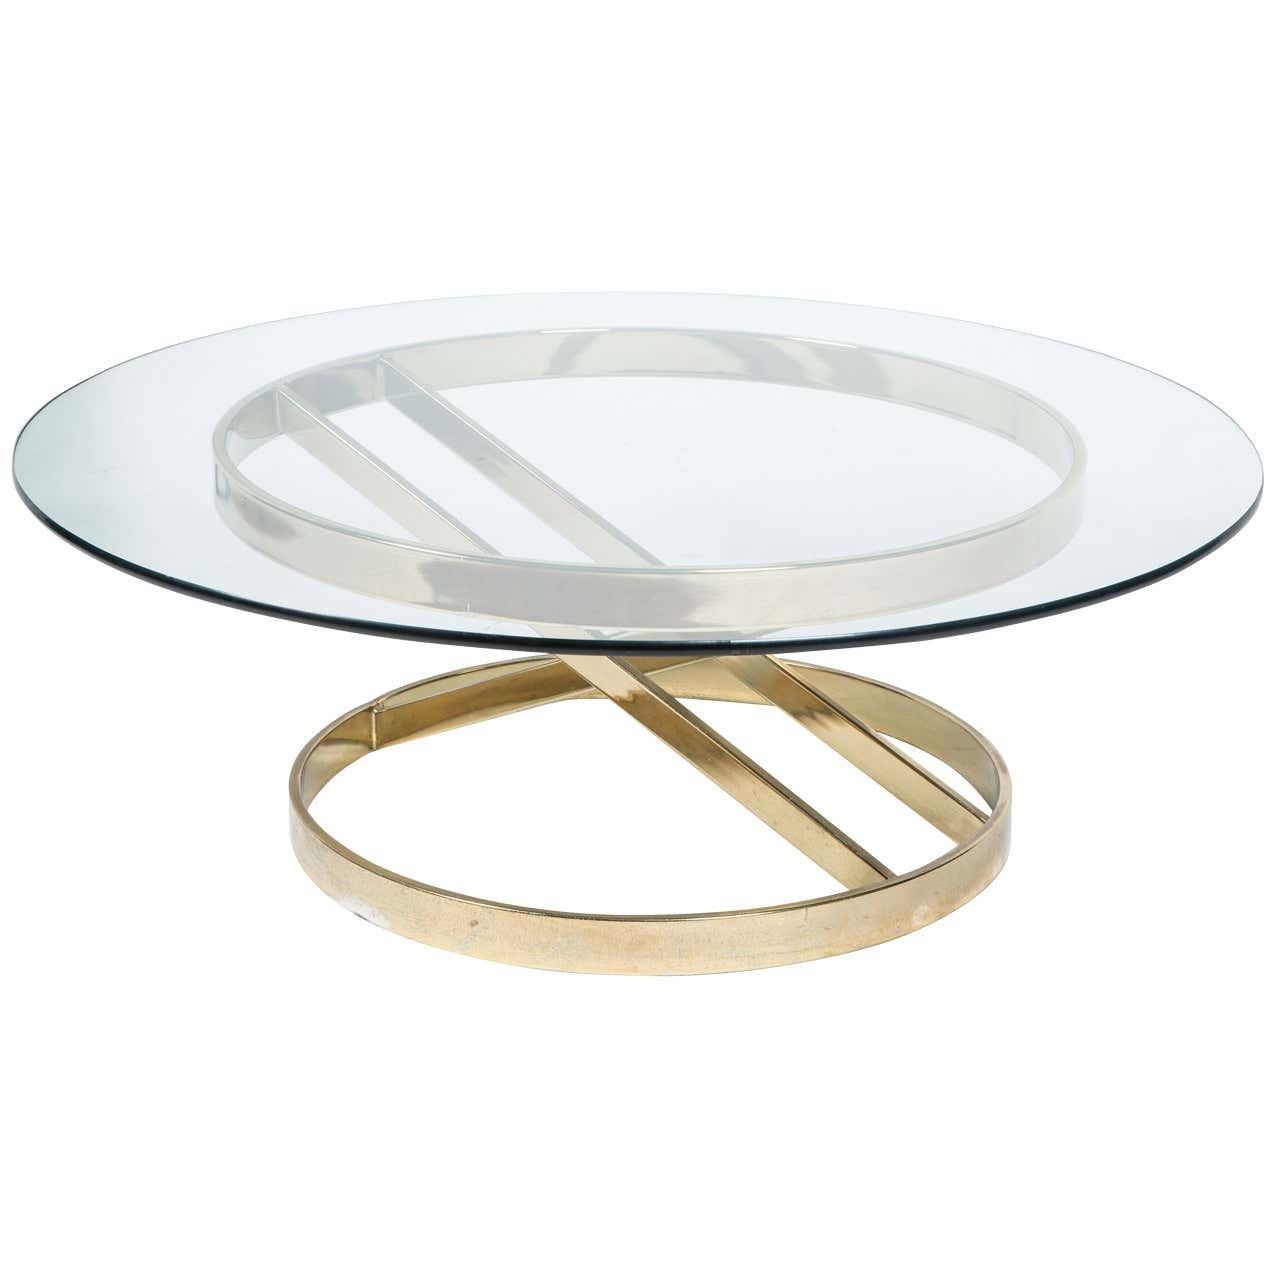 Late 20th Century Sculptural Brass Cocktail Table in the Style of Milo Baughman